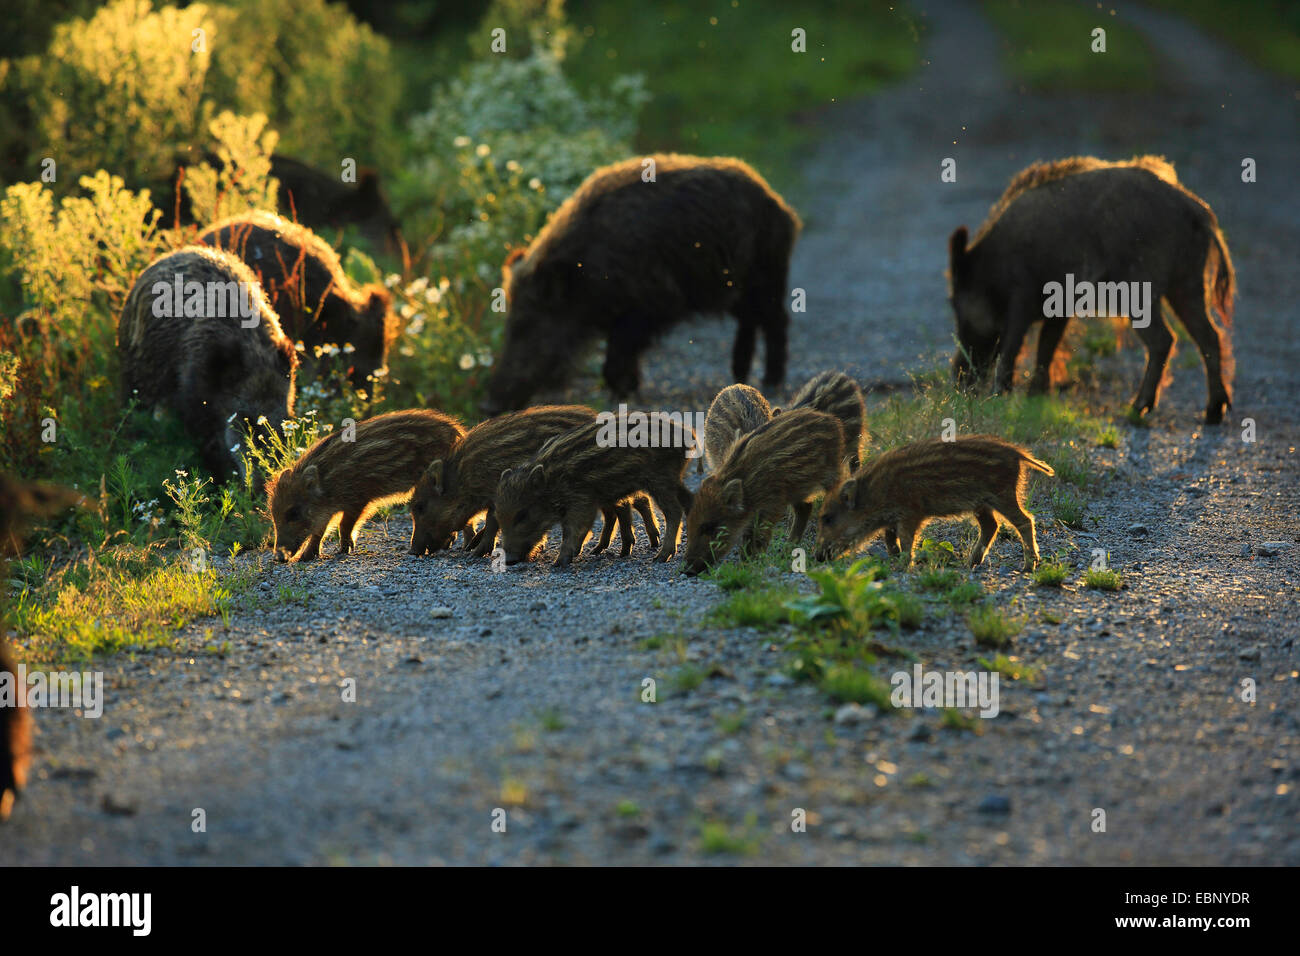 wild boar, pig, wild boar (Sus scrofa), wild sows with runts on a forest path, Germany, Baden-Wuerttemberg Stock Photo